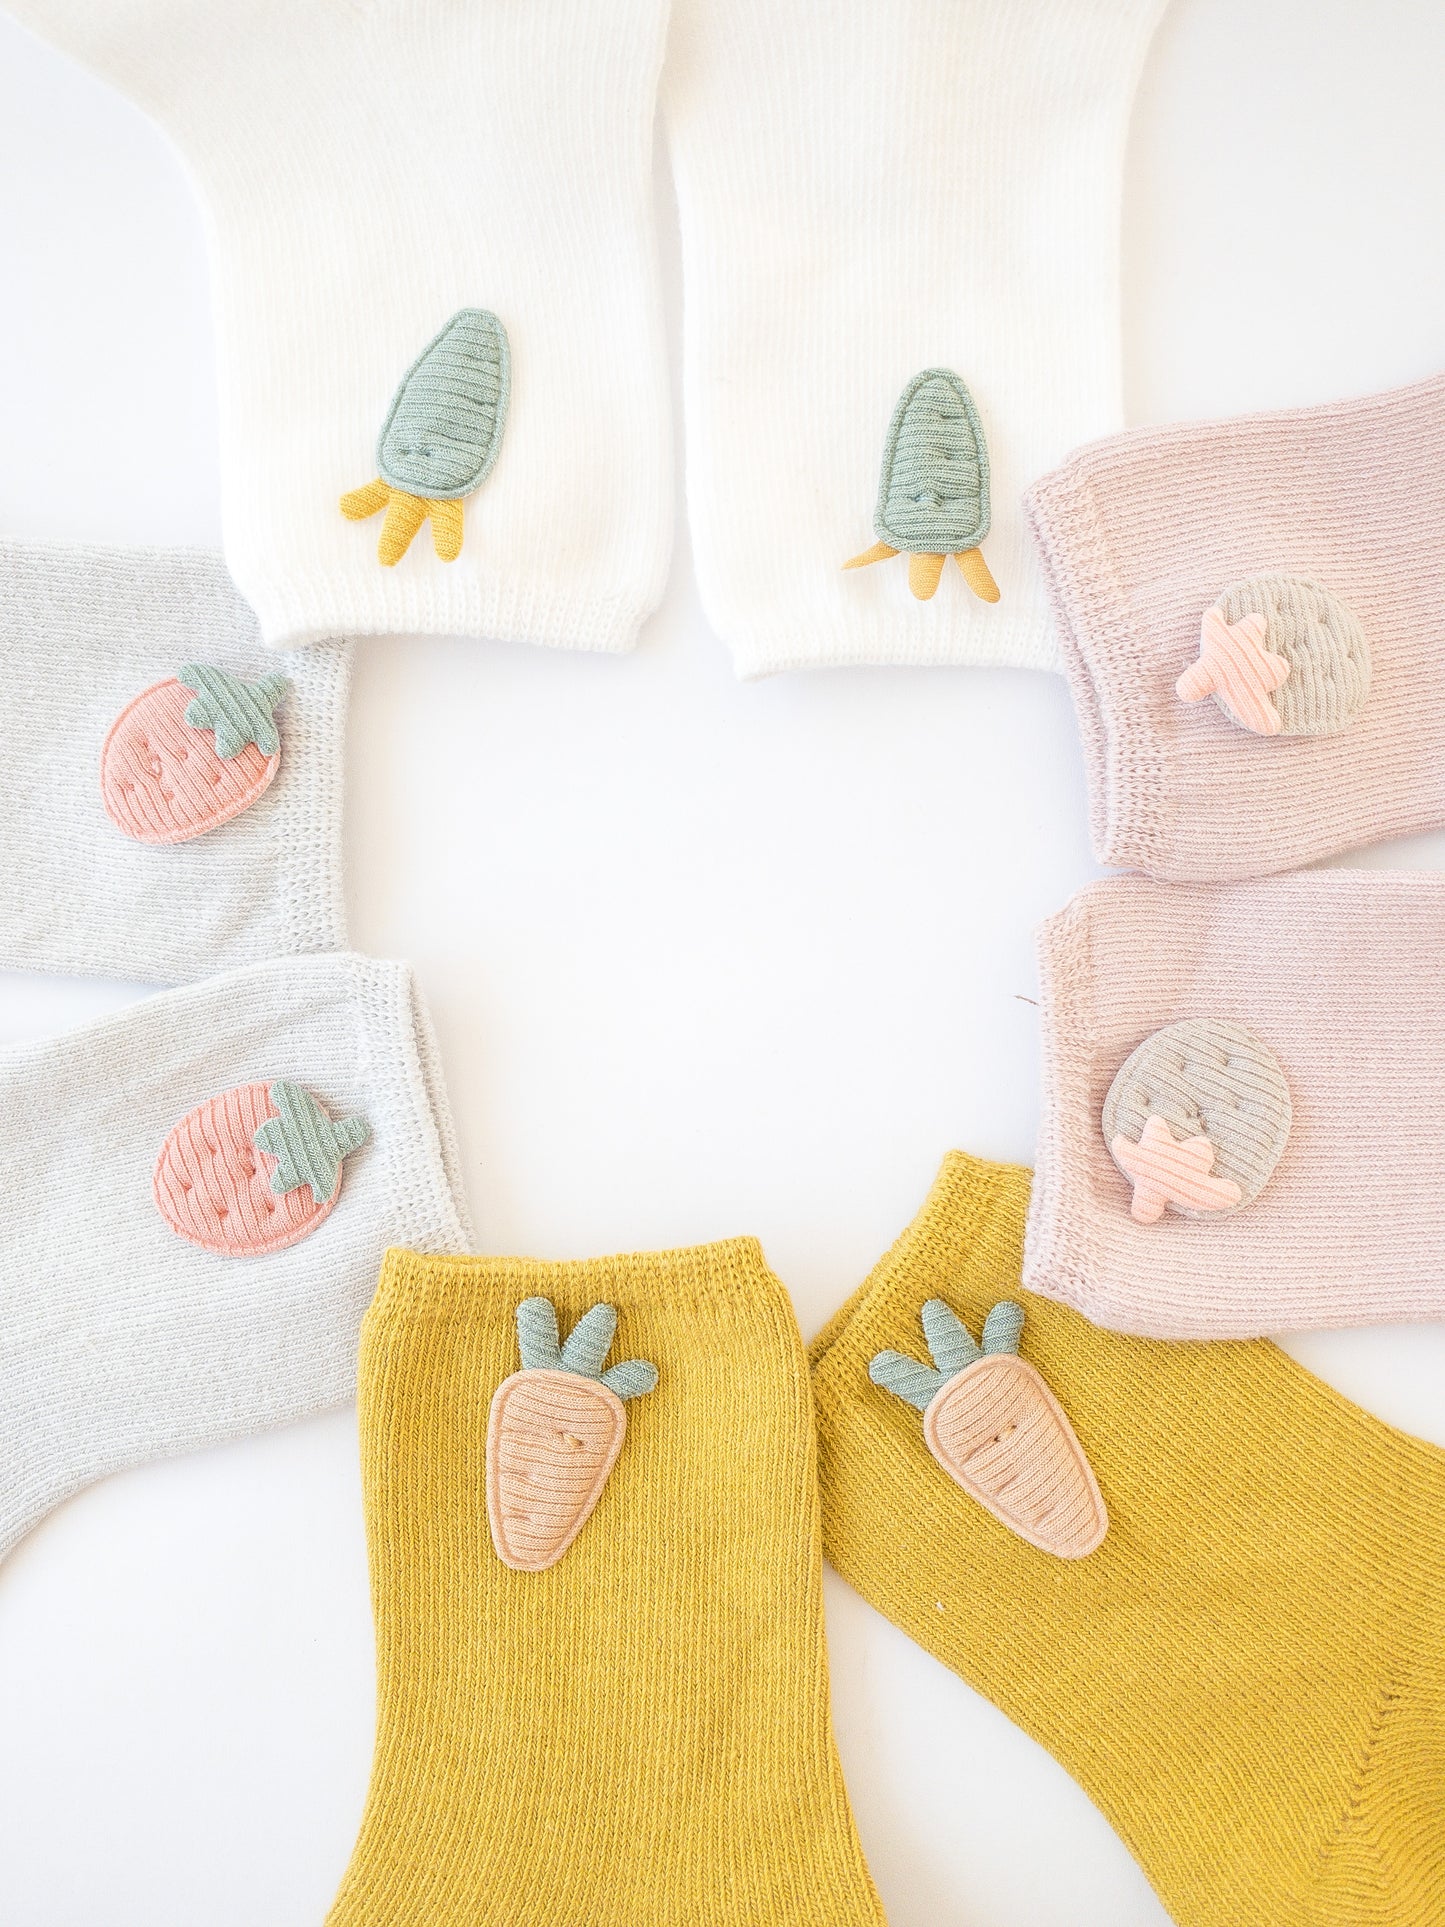 Our love for fruit continues with these socks adorned with cute fabric strawberries and carrots. Each set comes with 4 pairs of socks. Choose from two colorways: pink/yellow/grey/white or blue/grey/taupe/white.